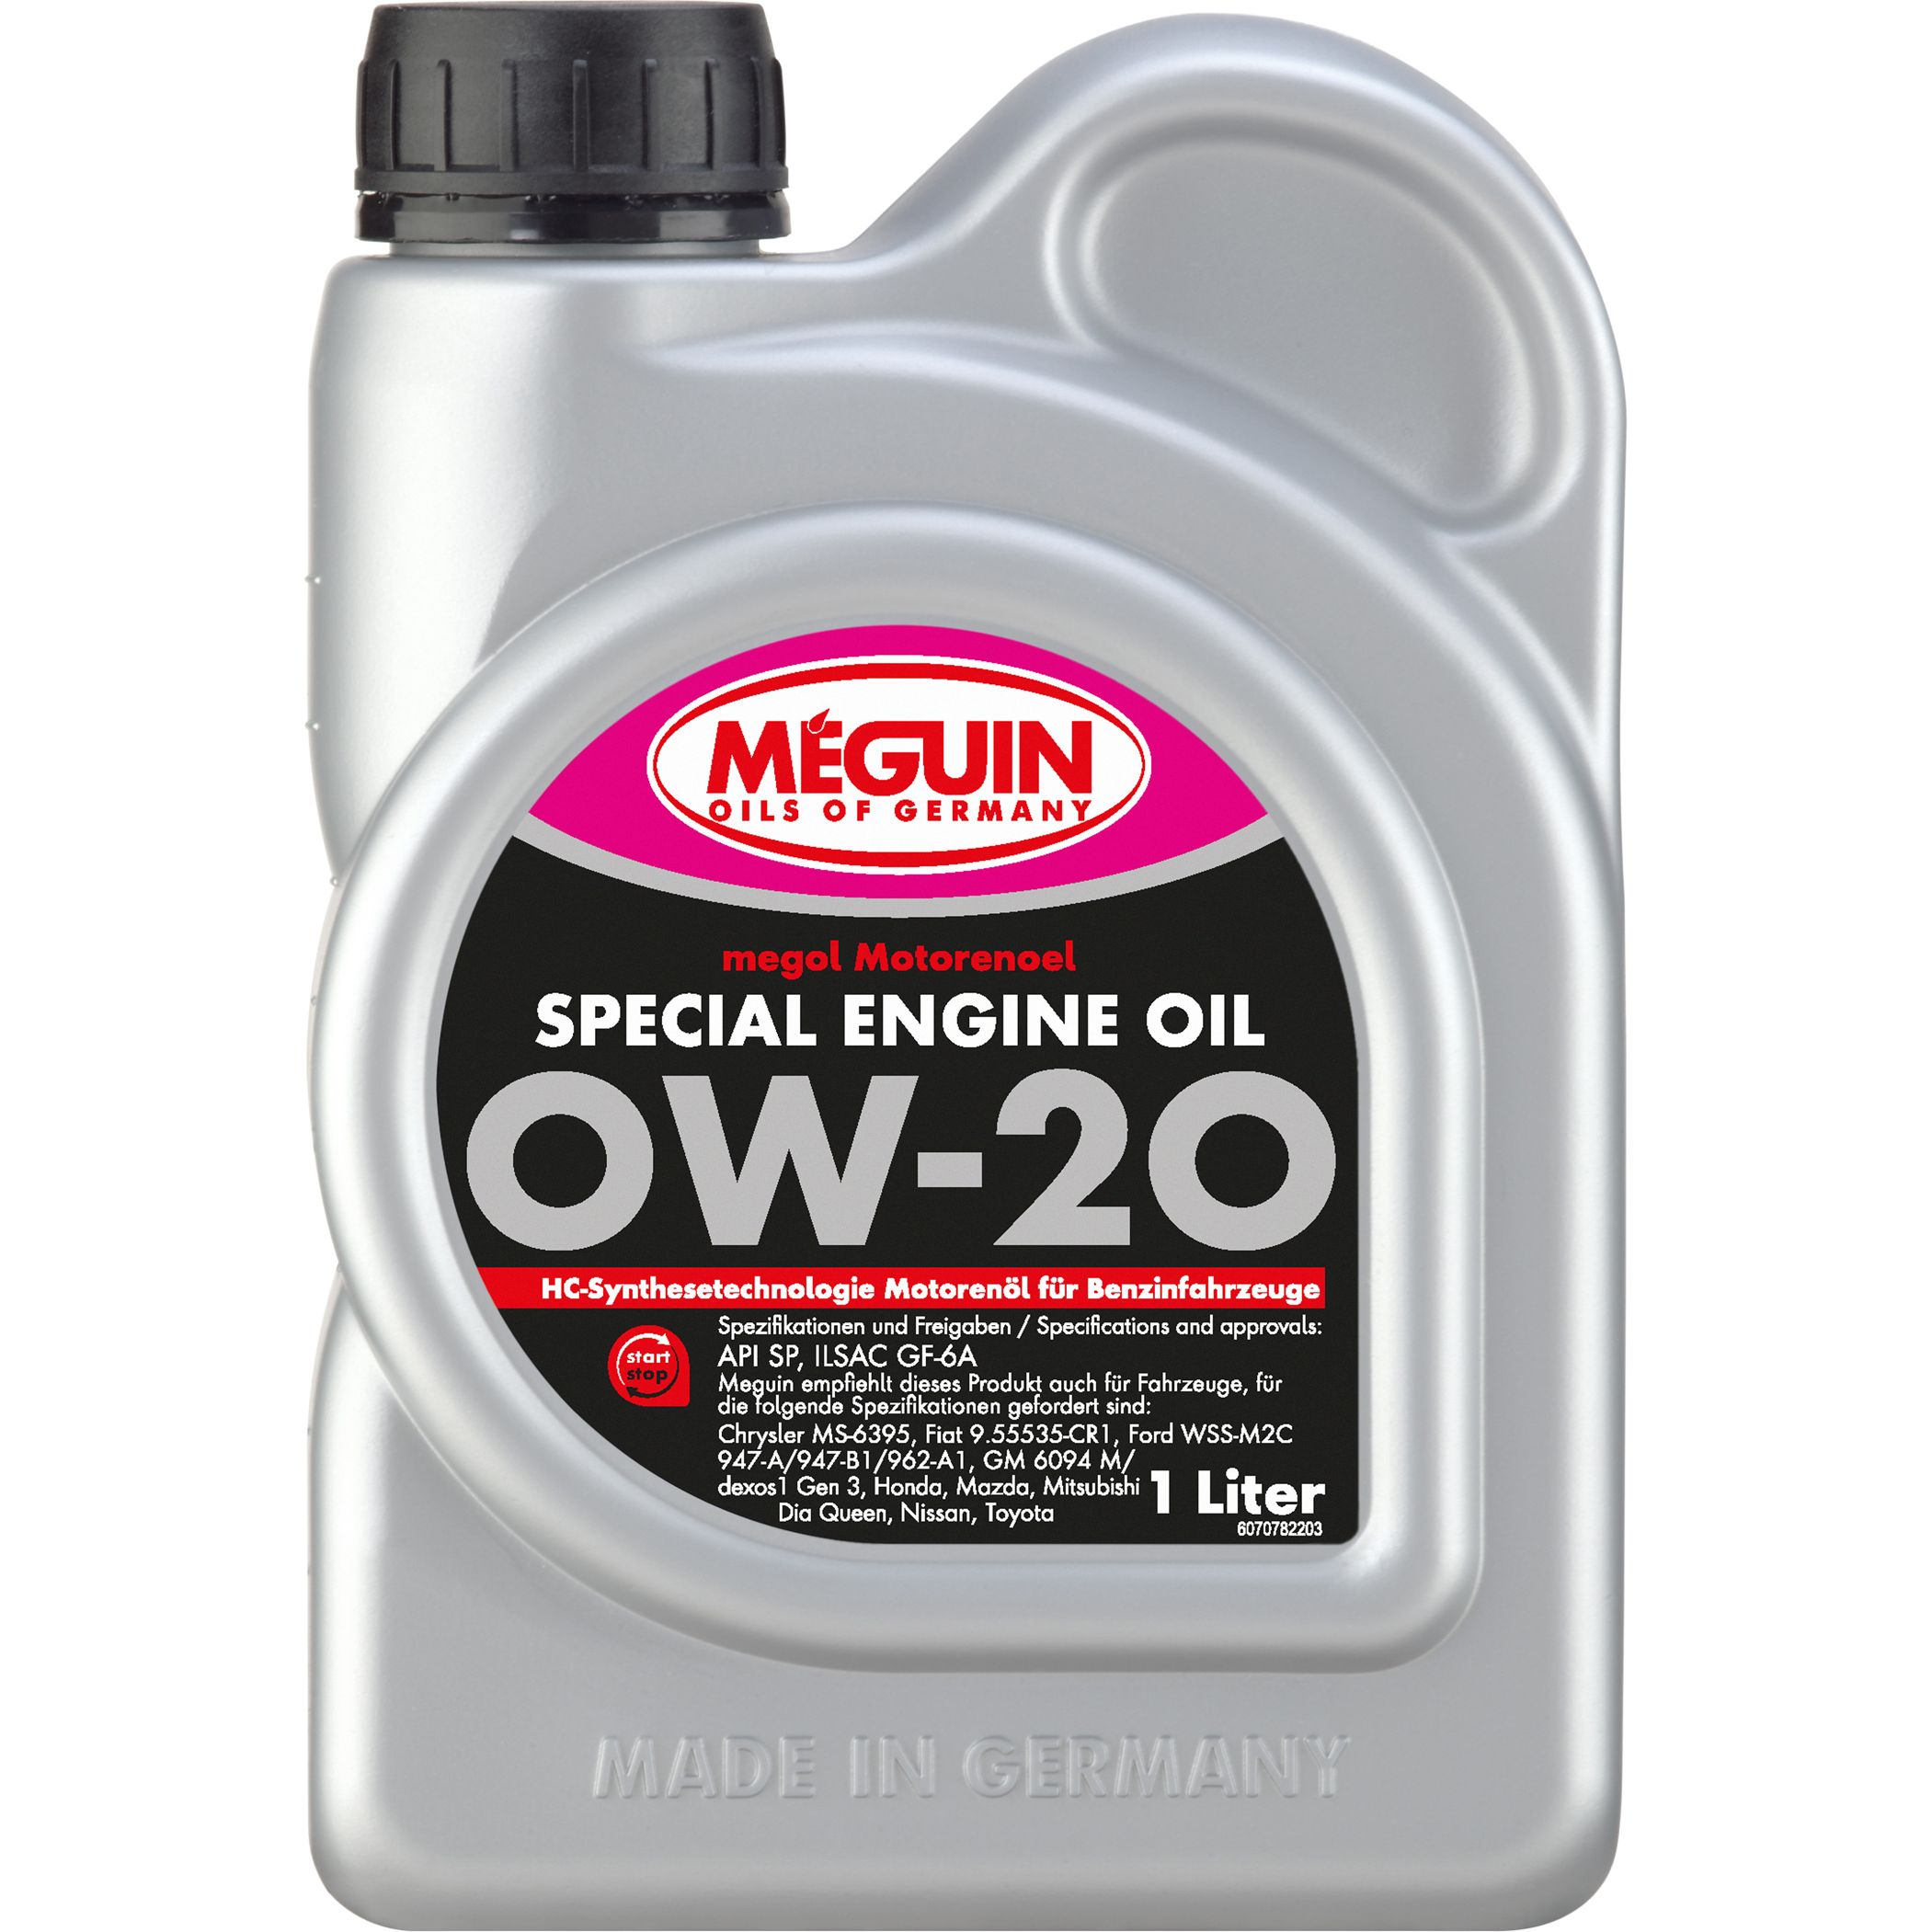 Моторное масло Meguin Special Engine Oil Sae 0W-20 1 л - фото 1